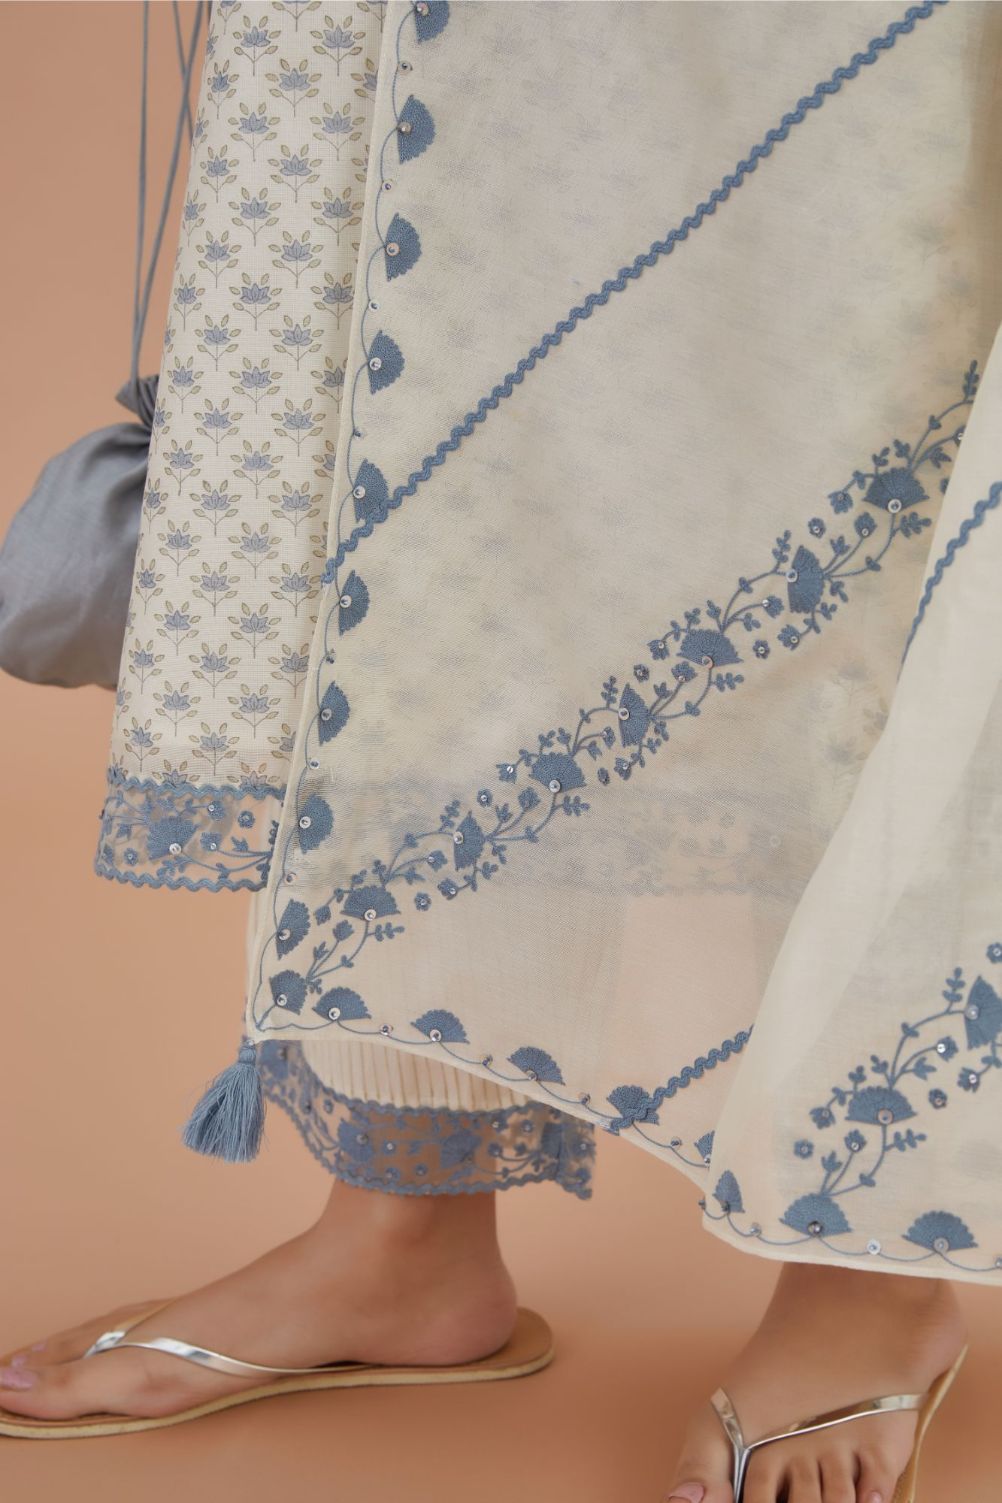 Off white silk Chanderi dupatta with all-over blue embroidery and rickrack, highlighted with sequin work.